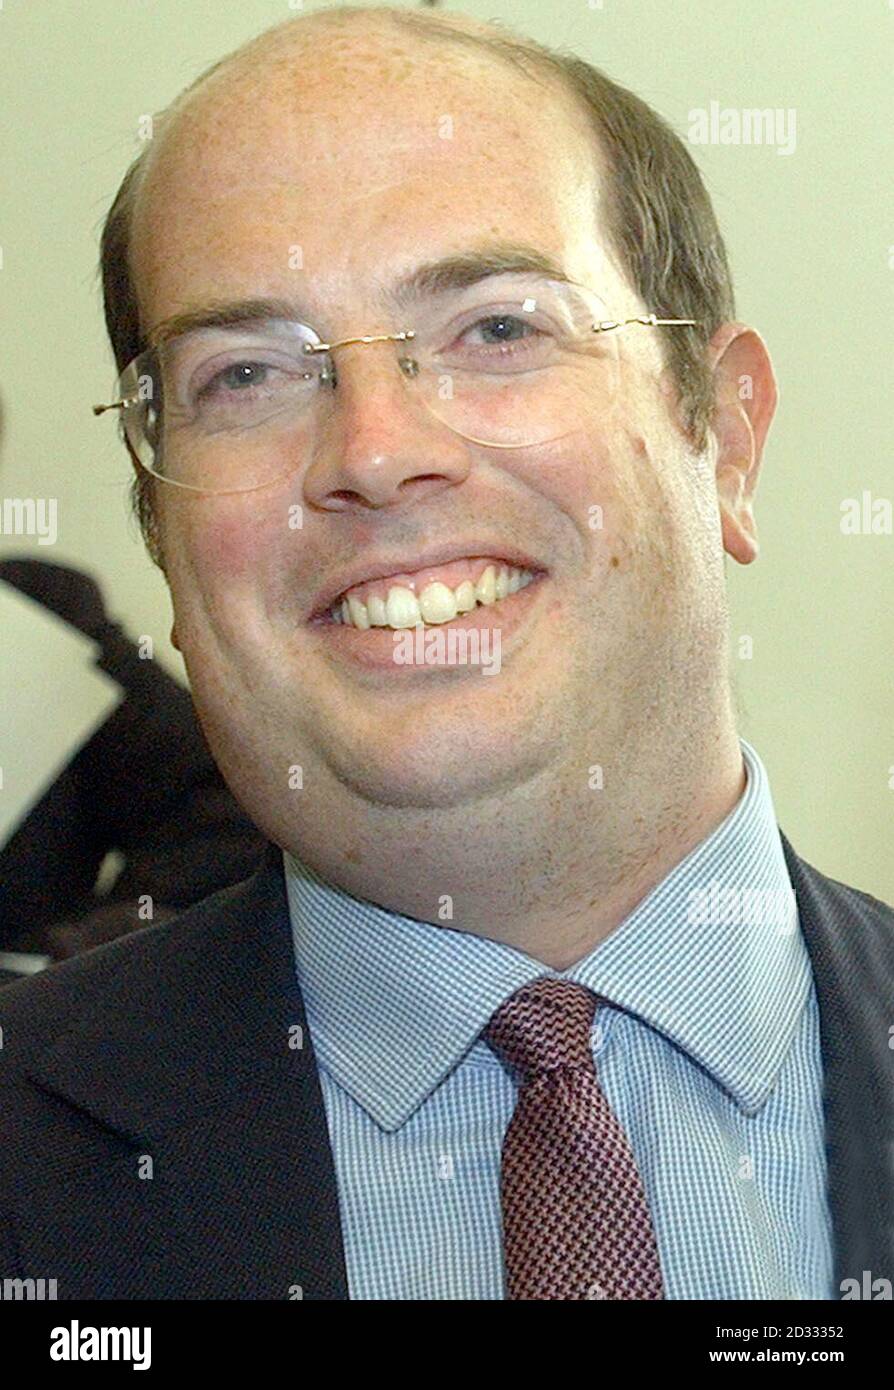 BBC journalist Andrew Gilligan at a press conference in central London about the report published about The Decision to go to War on Iraq. * 17/7/03: He was due to face a second grilling from MPs over the claims he reported that the Government 'sexed up' its dossier on Iraqi weapons. 18/07/03 : BBC reporter Andrew Gilligan, who filed the original report claiming the Government had 'sexed up' the weapons dossier. Dr David Kelly, an official adviser on Iraqi arms named as the possible 'mole' for a BBC report claiming the Government 'sexed up' its dossier on weapons of mass destruction has b Stock Photo